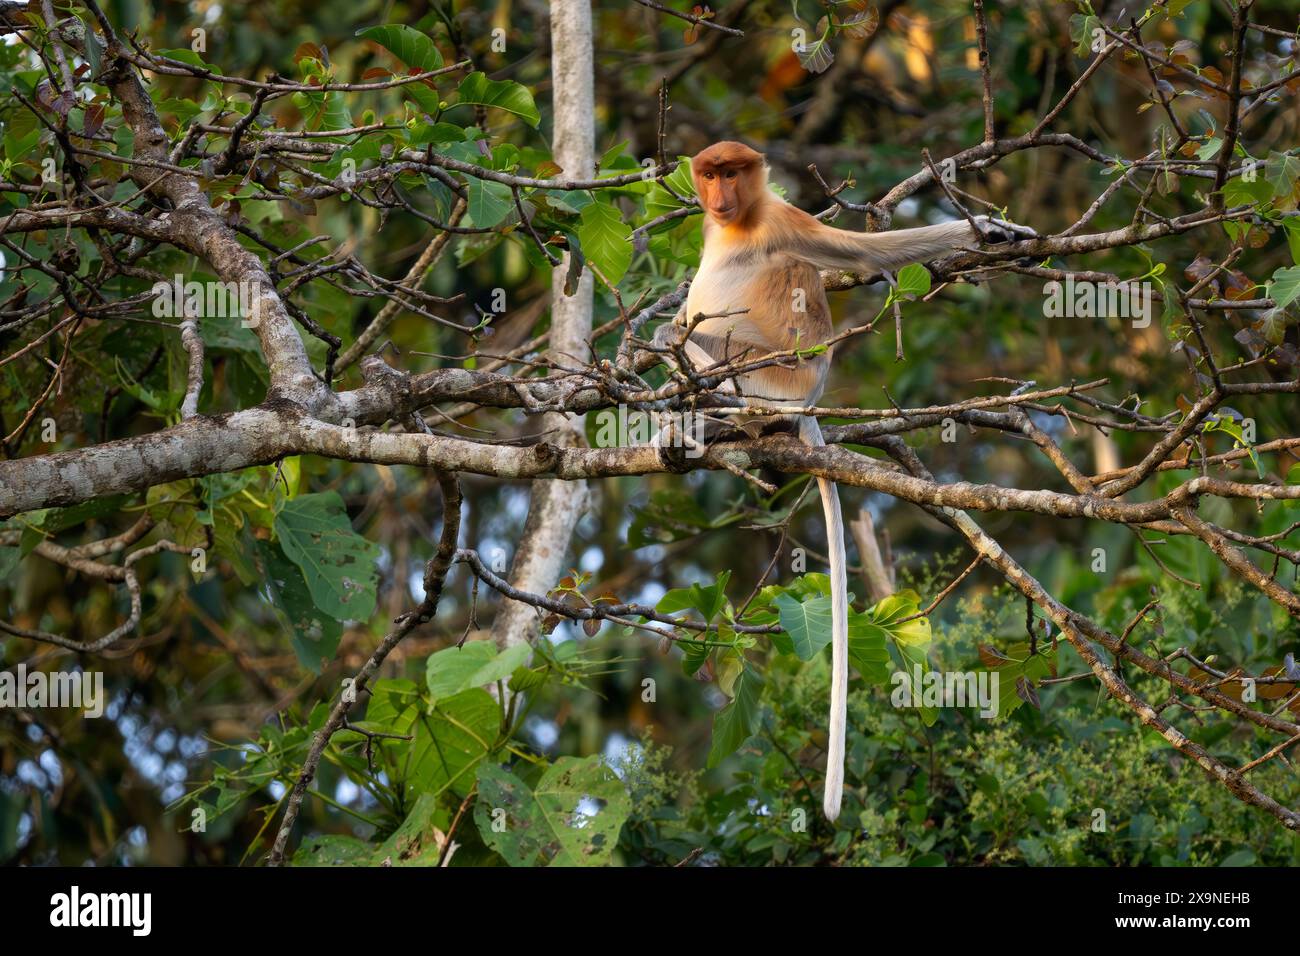 Proboscis Monkey - Nasalis larvatus, beautiful unique primate with large nose endemic to mangrove forests of the southeast Asian island of Borneo. Stock Photo